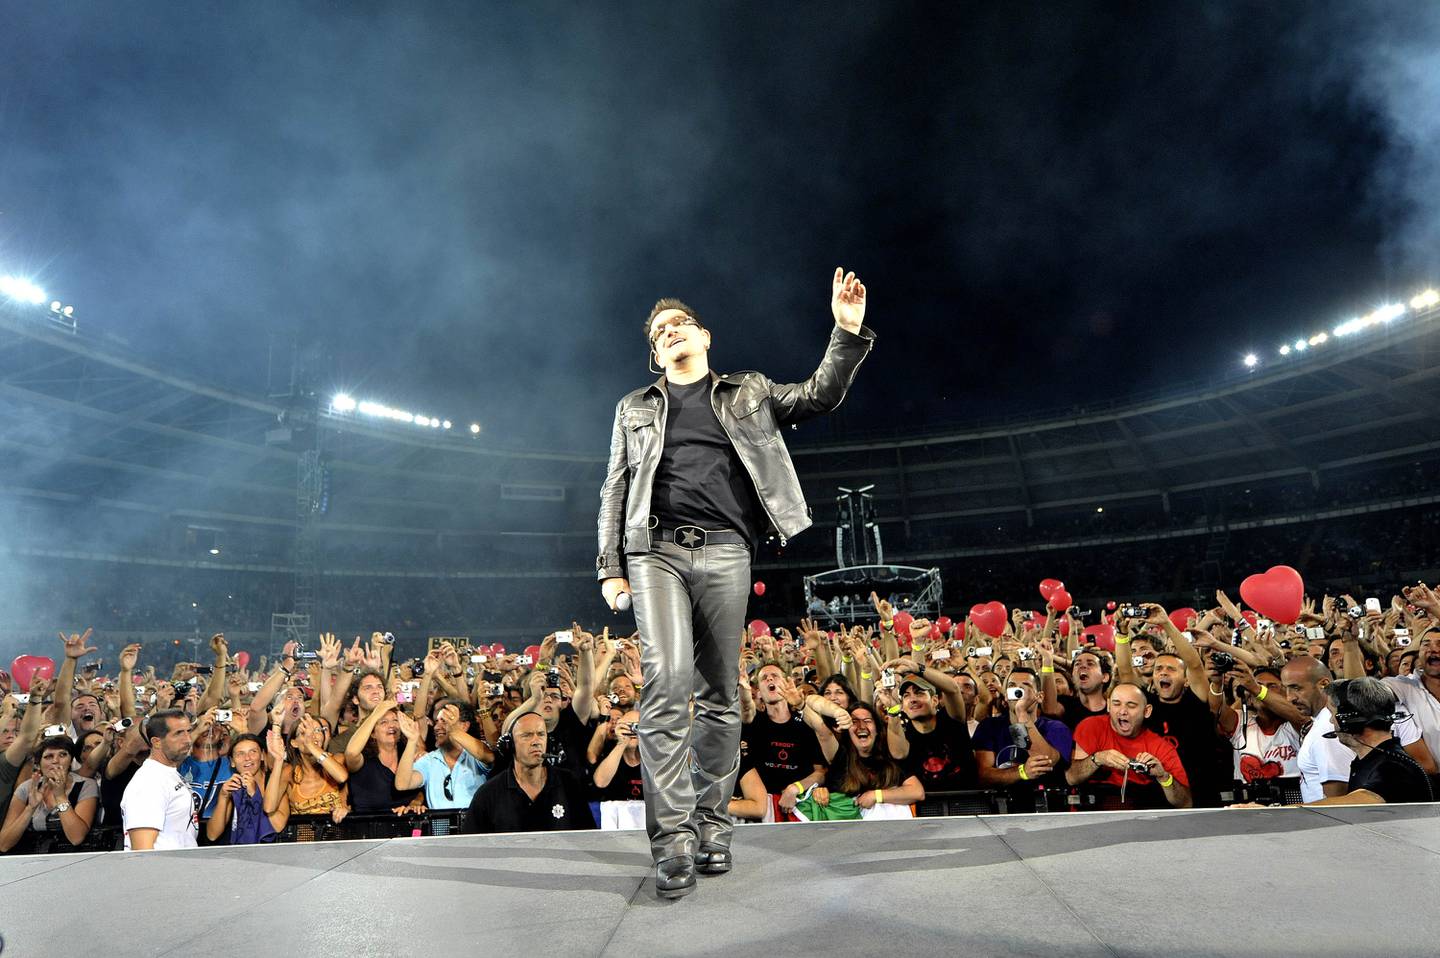 Singer Bono of Irish band U2 performs during their first concert of the new European tour after Bono underwent back surgery following an injury during training, in Turin, Italy, Friday, Aug. 6, 2010. After the European dates, the band will then head to the United States, Australia and New Zealand for a series of shows. (AP Photo/Massimo Pinca)